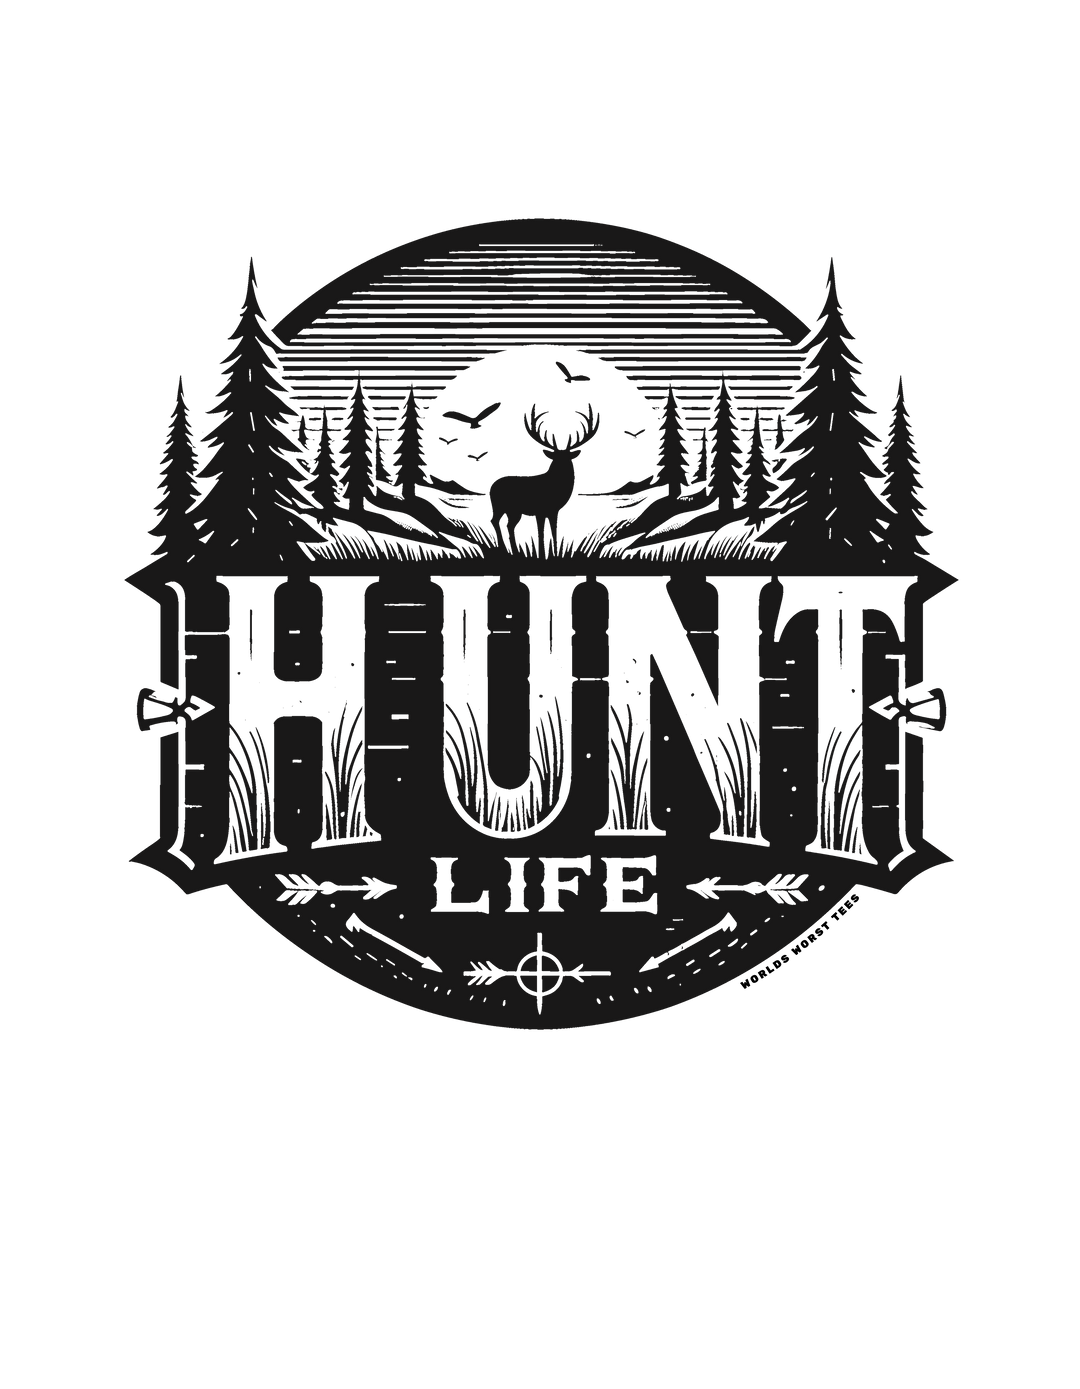 A black and white Hunt Life Tee logo featuring a deer, birds, and forest silhouette. 100% ring-spun cotton tee with a relaxed fit, double-needle stitching, and no side-seams for durability and comfort.